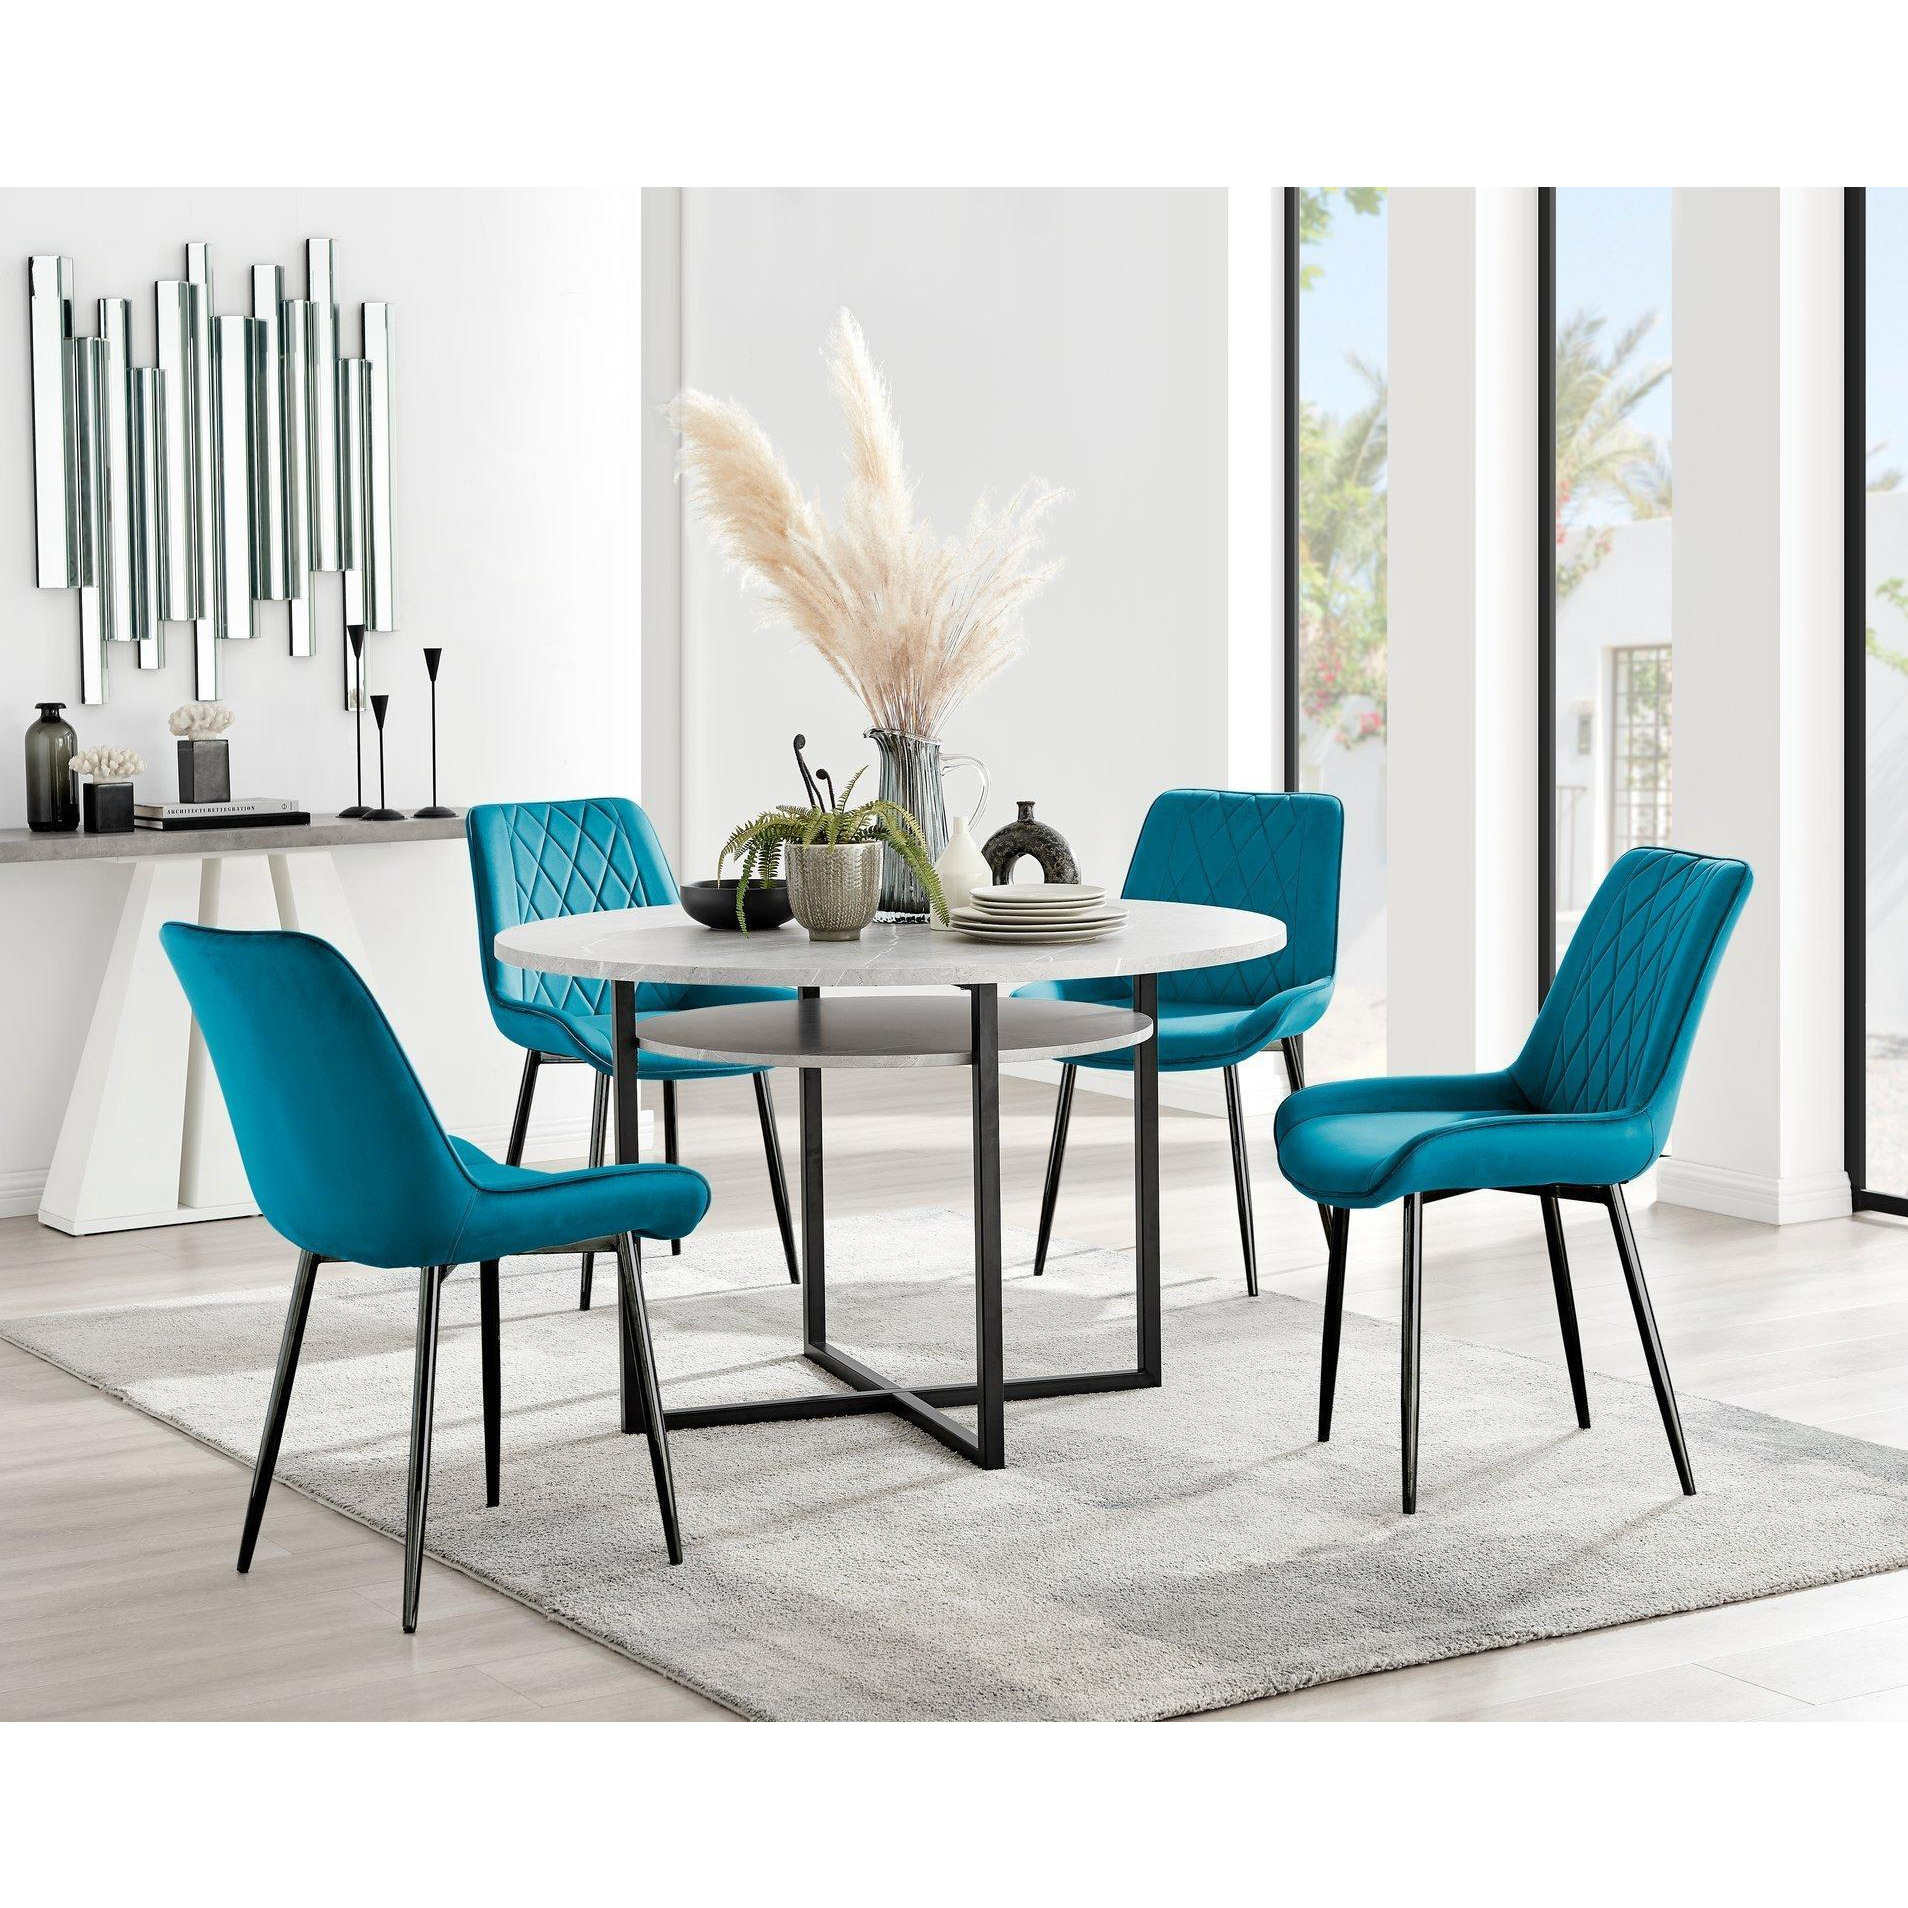 Adley Grey Concrete Effect And Black Round Dining Table with  Shelf and 4 Velvet Pesaro Dining Chairs - image 1